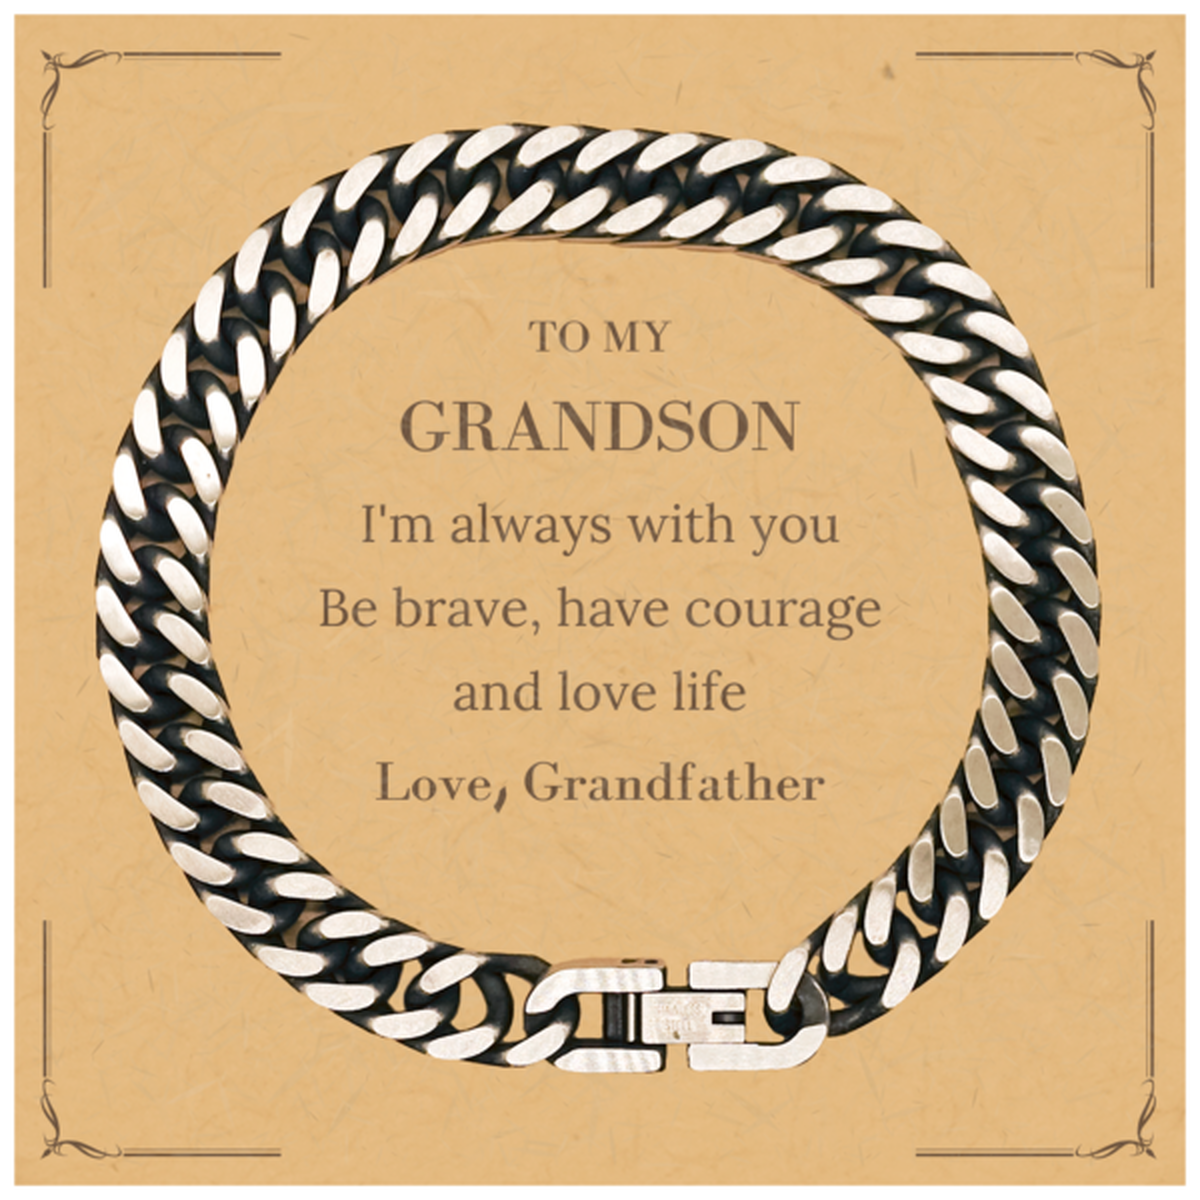 To My Grandson Gifts from Grandfather, Unique Cuban Link Chain Bracelet Inspirational Christmas Birthday Graduation Gifts for Grandson I'm always with you. Be brave, have courage and love life. Love, Grandfather